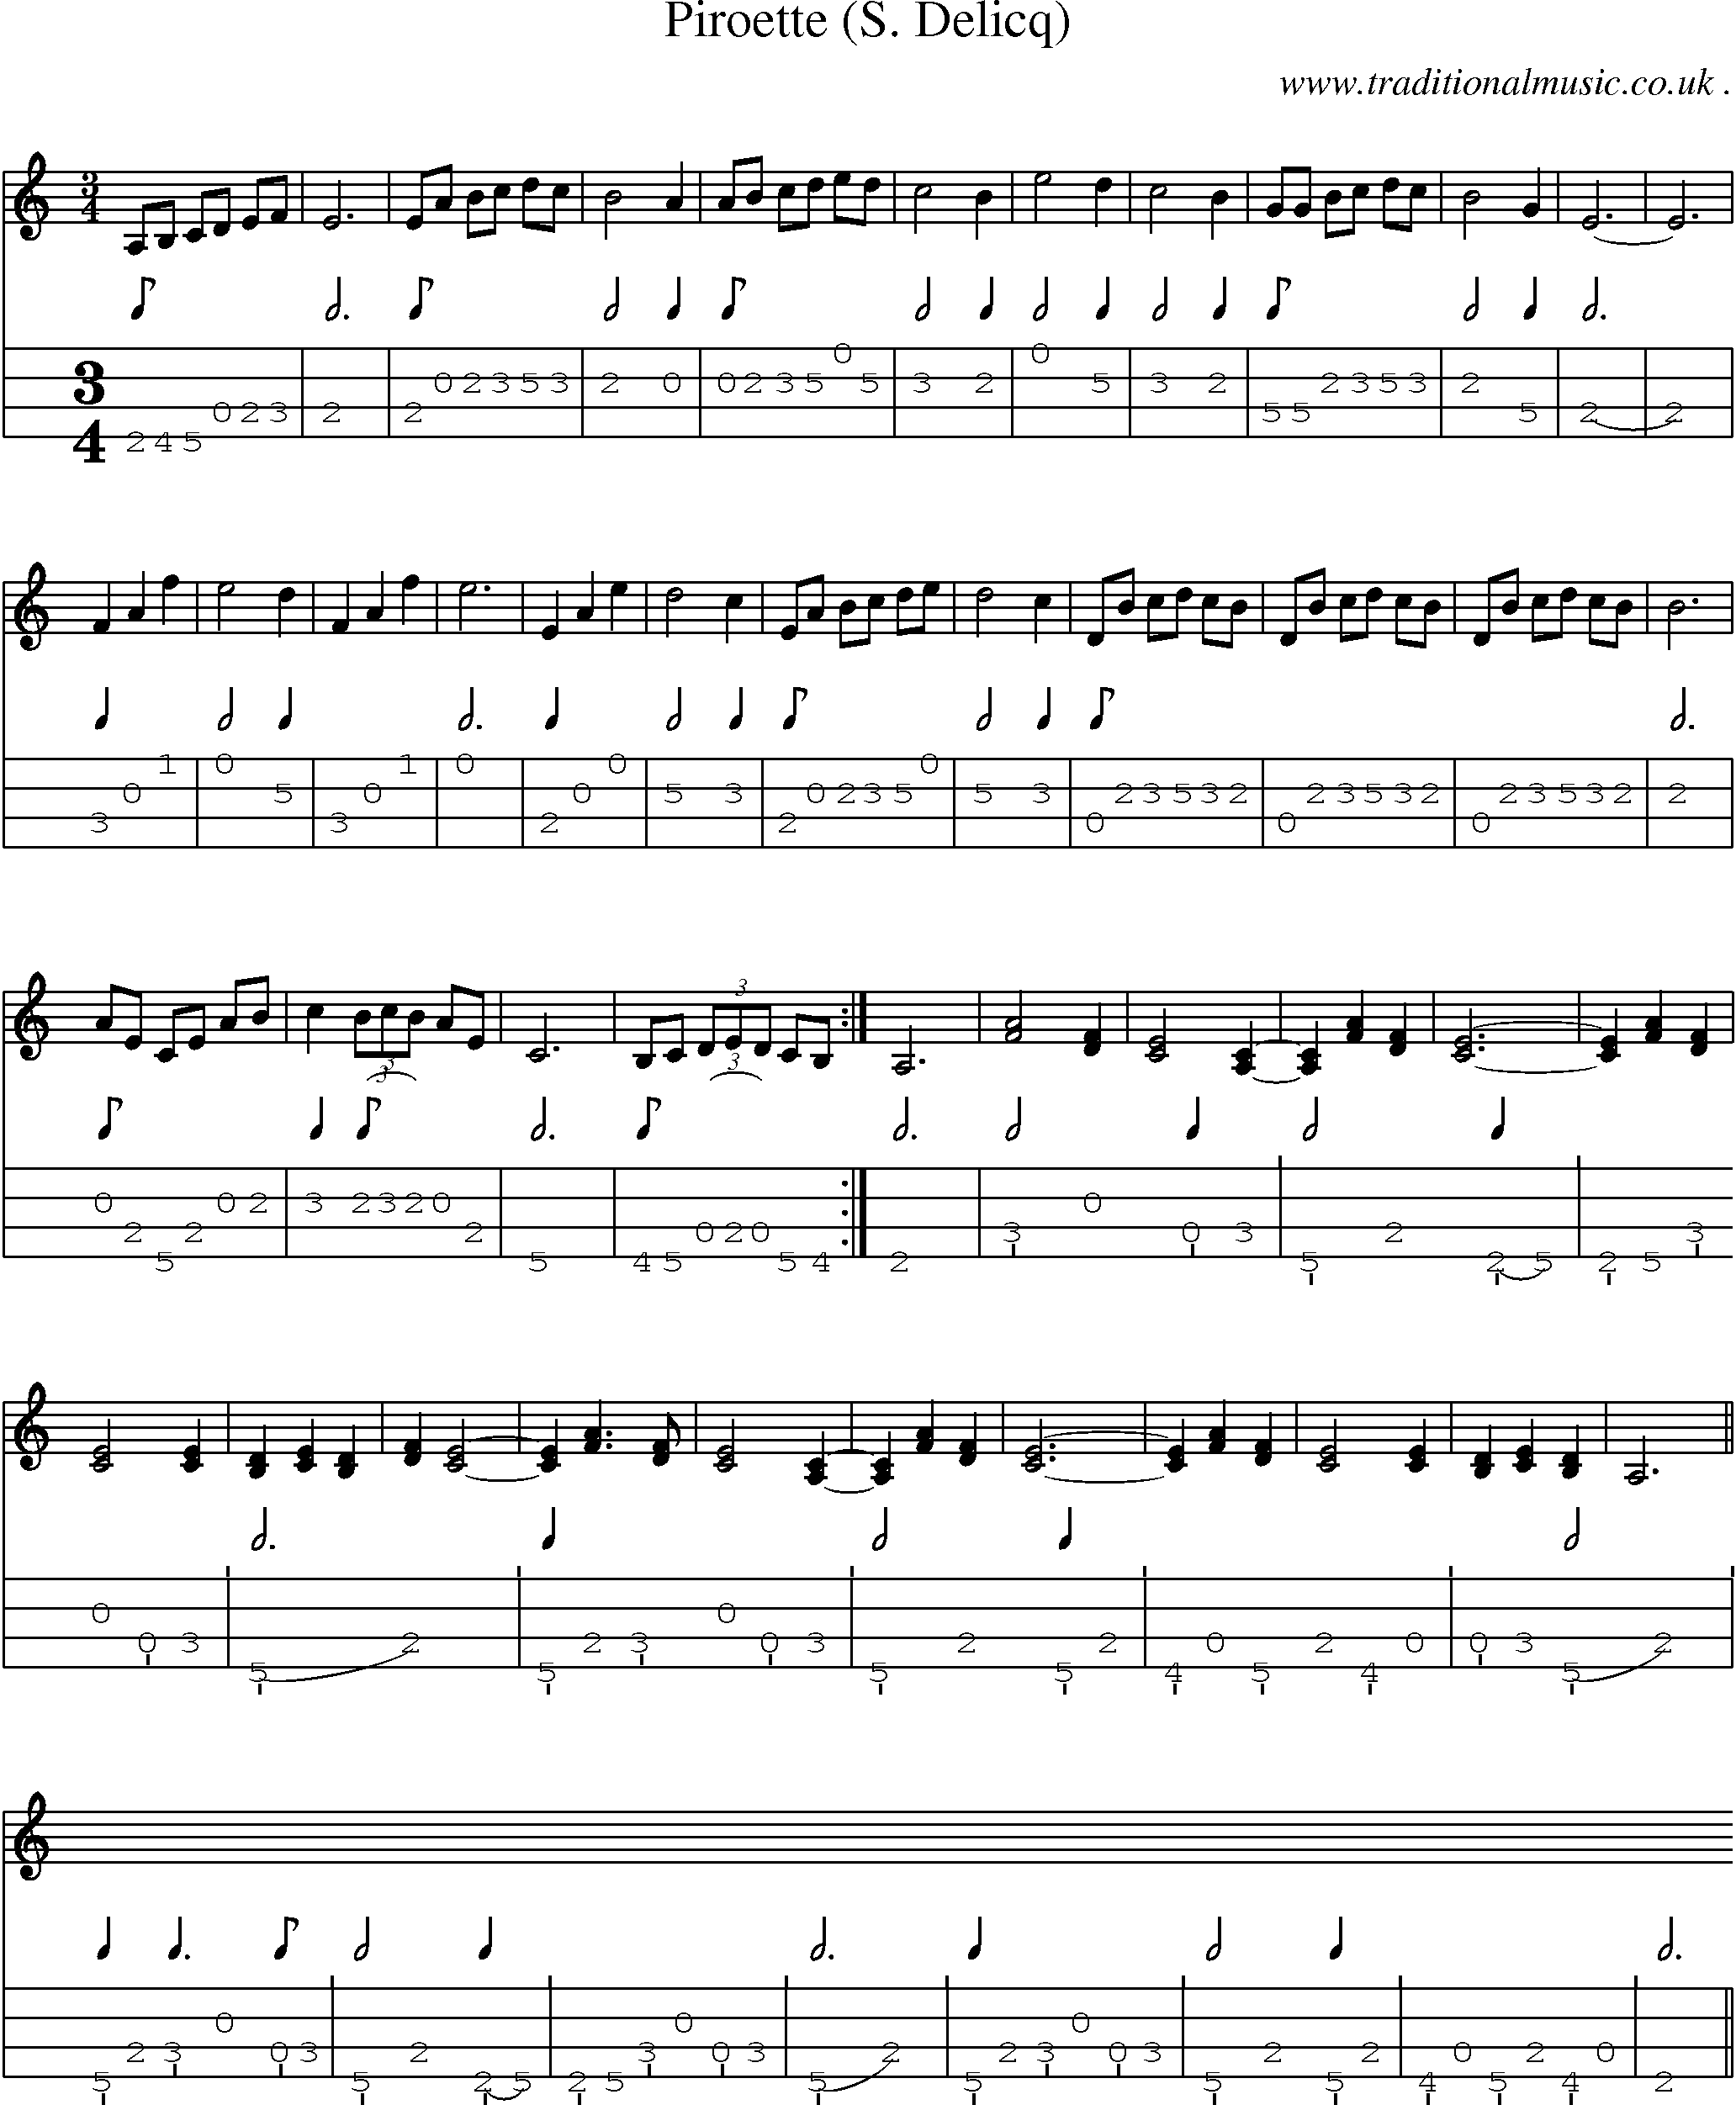 Sheet-Music and Mandolin Tabs for Piroette (s Delicq)